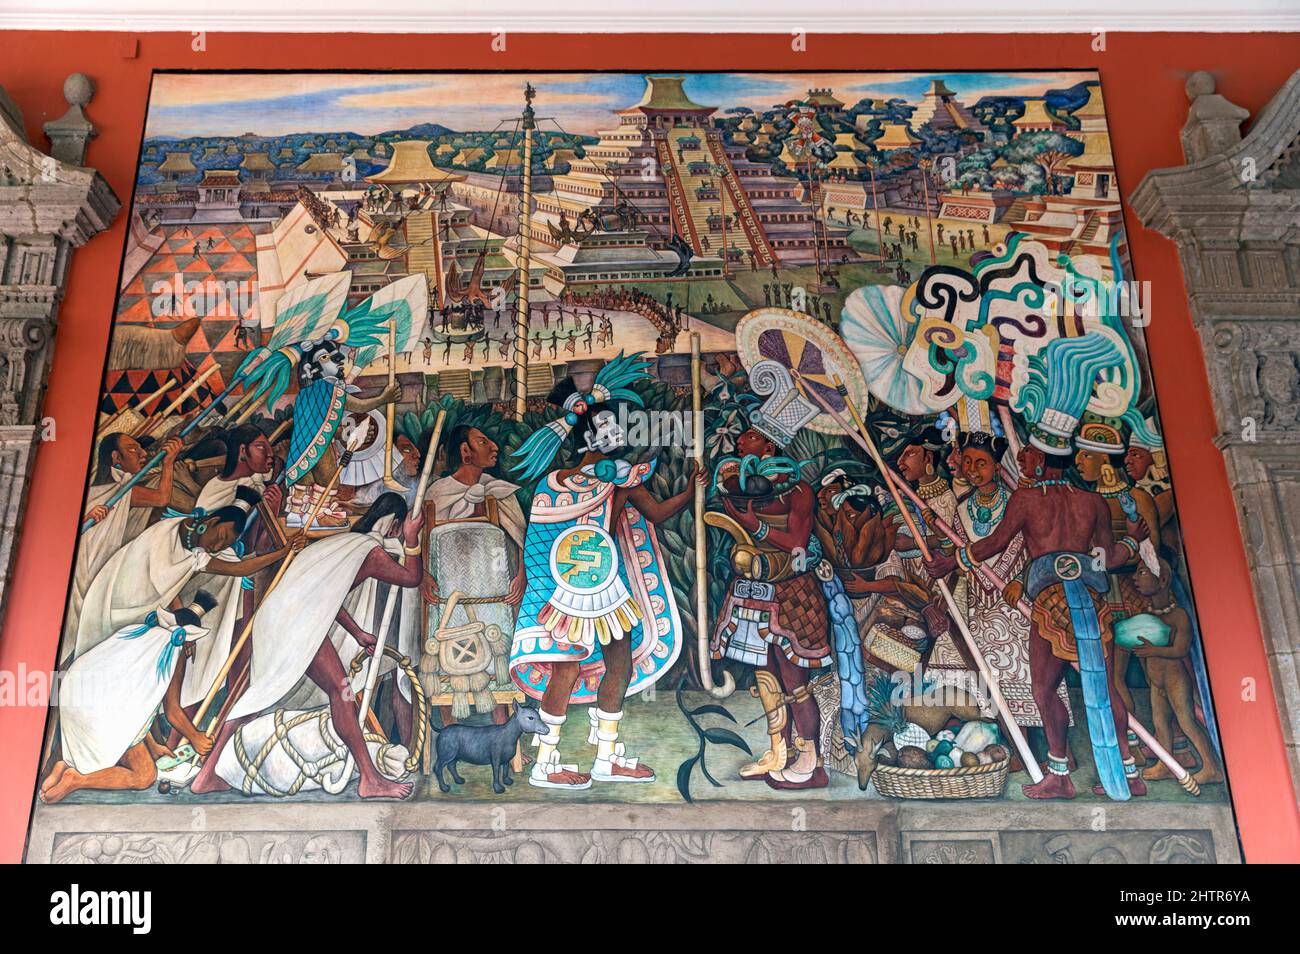 The corridor of National Palace with the famous mural The Totonac Civilization by Diego Rivera - Mexico City, Mexico Stock Photo